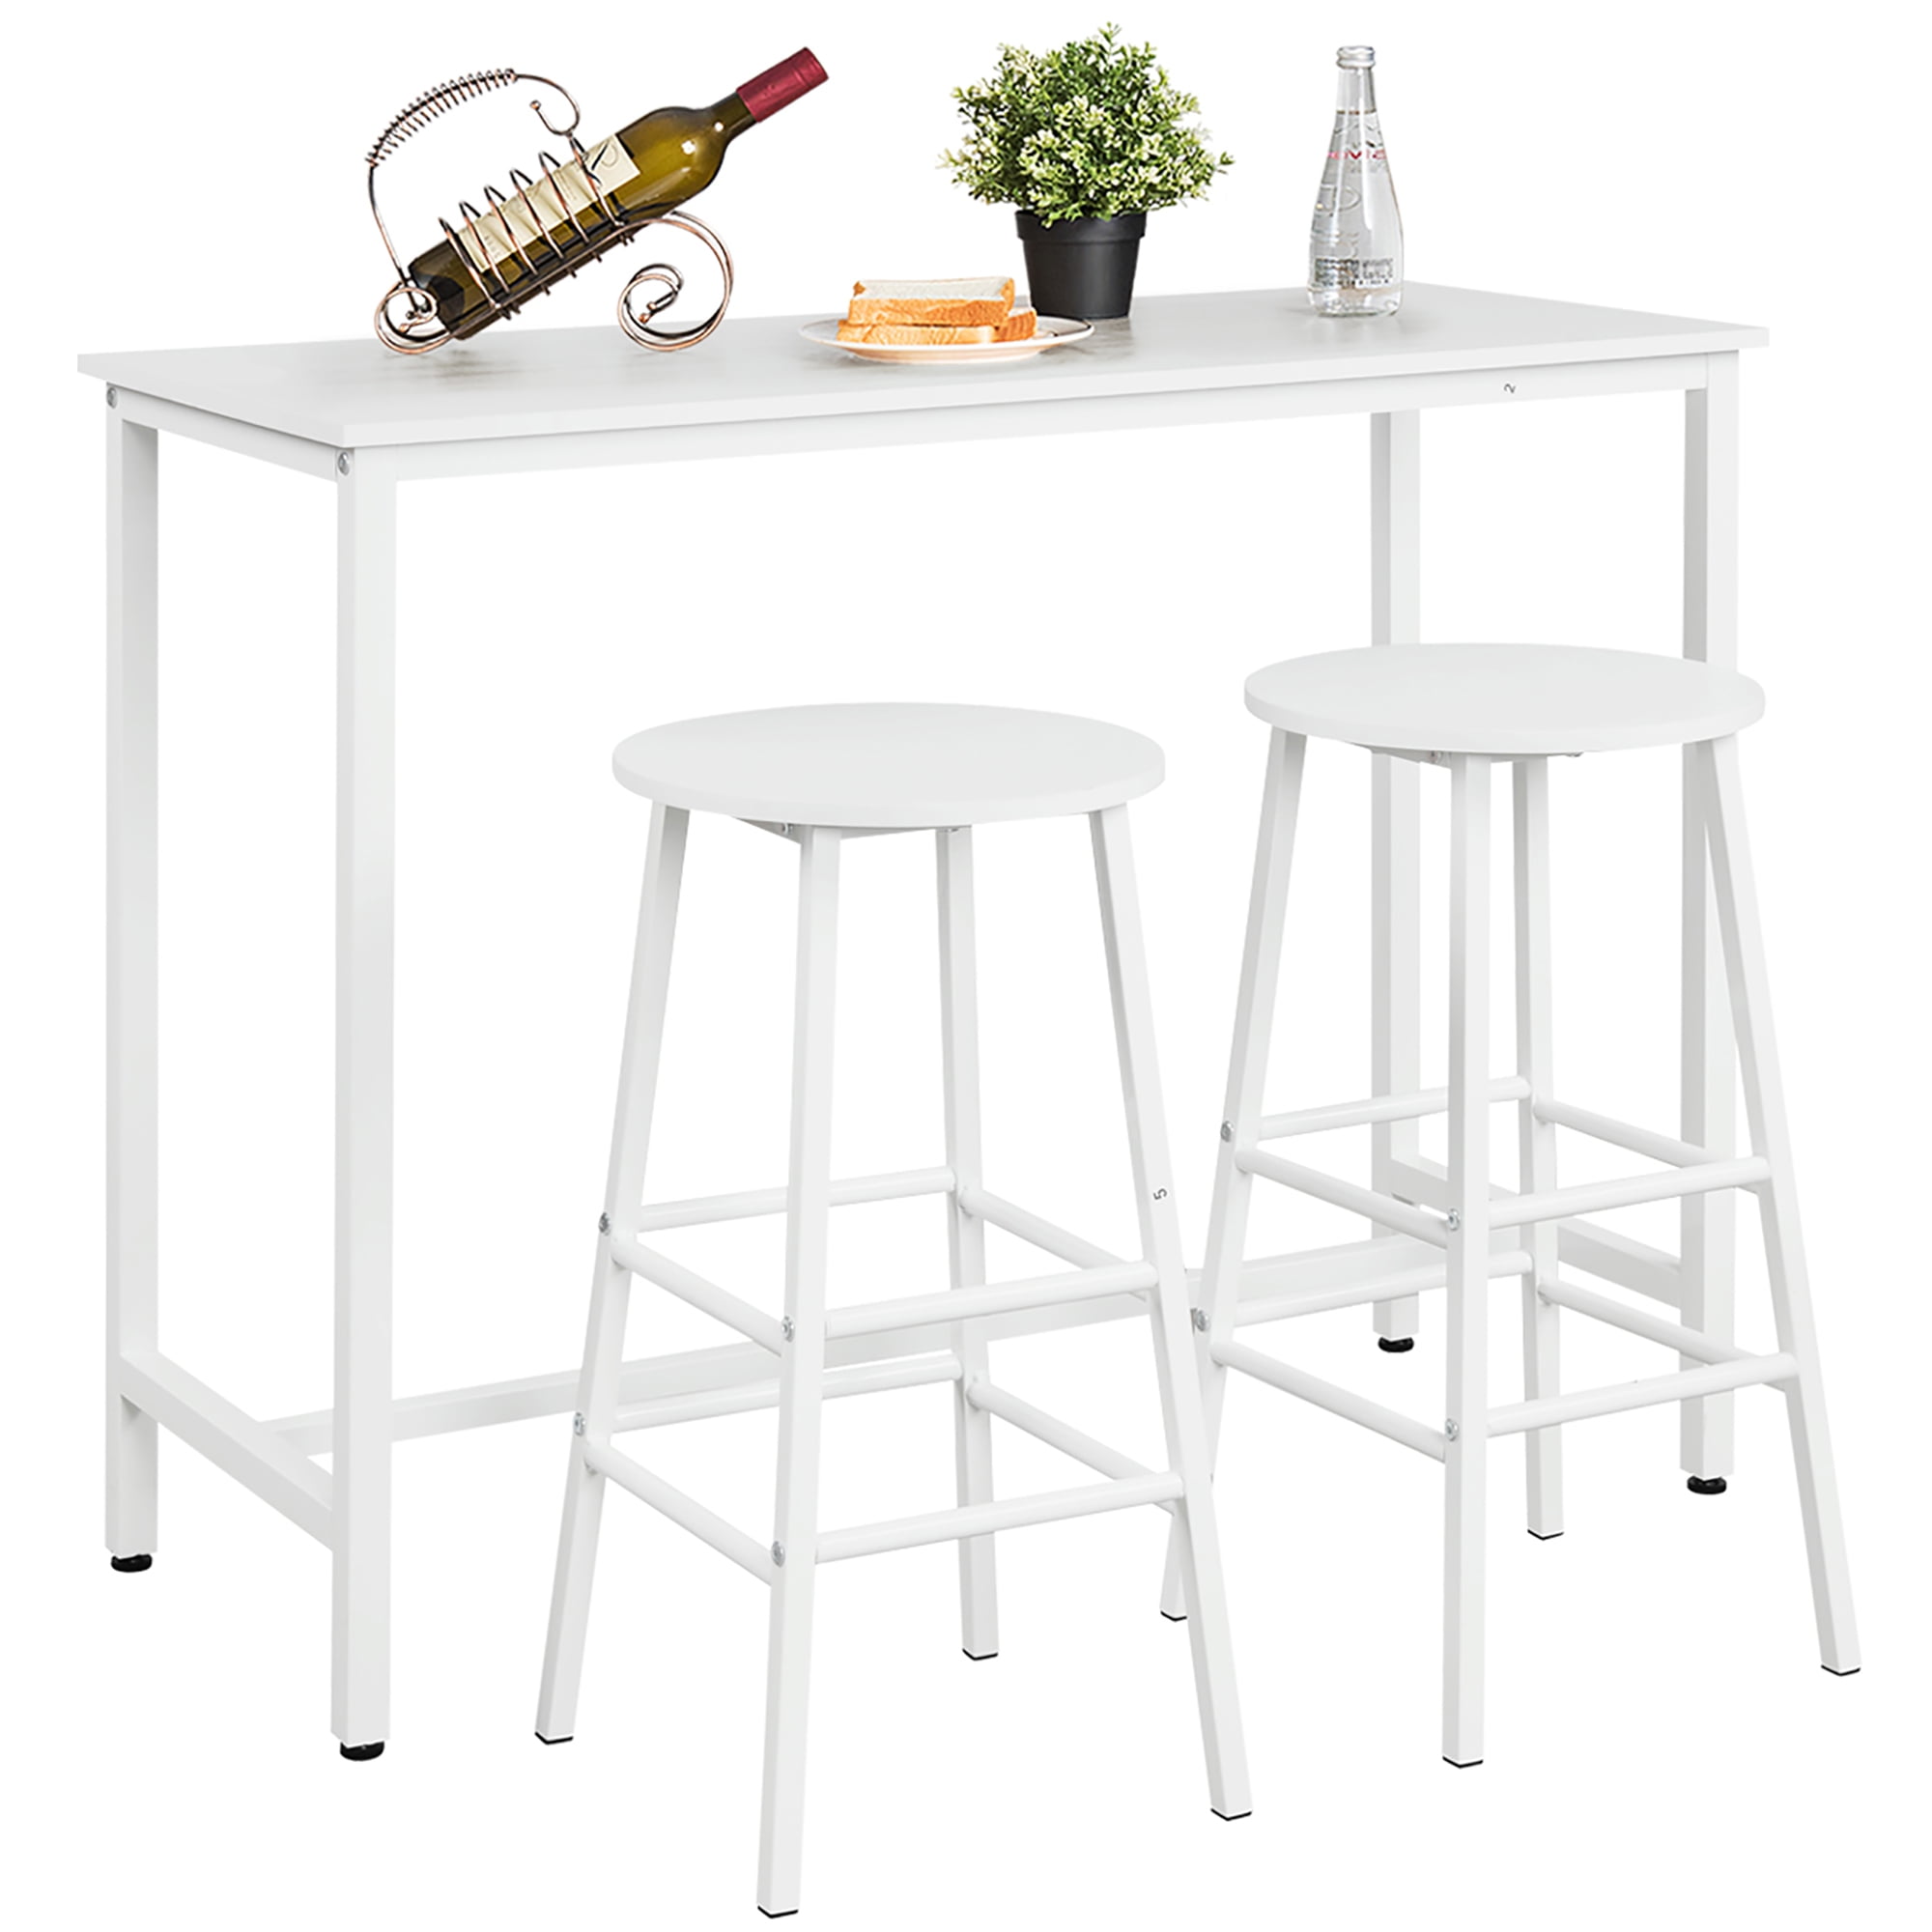 Costway 3 Piece Bar Table Set Pub Table And 2 Stools Counter Kitchen